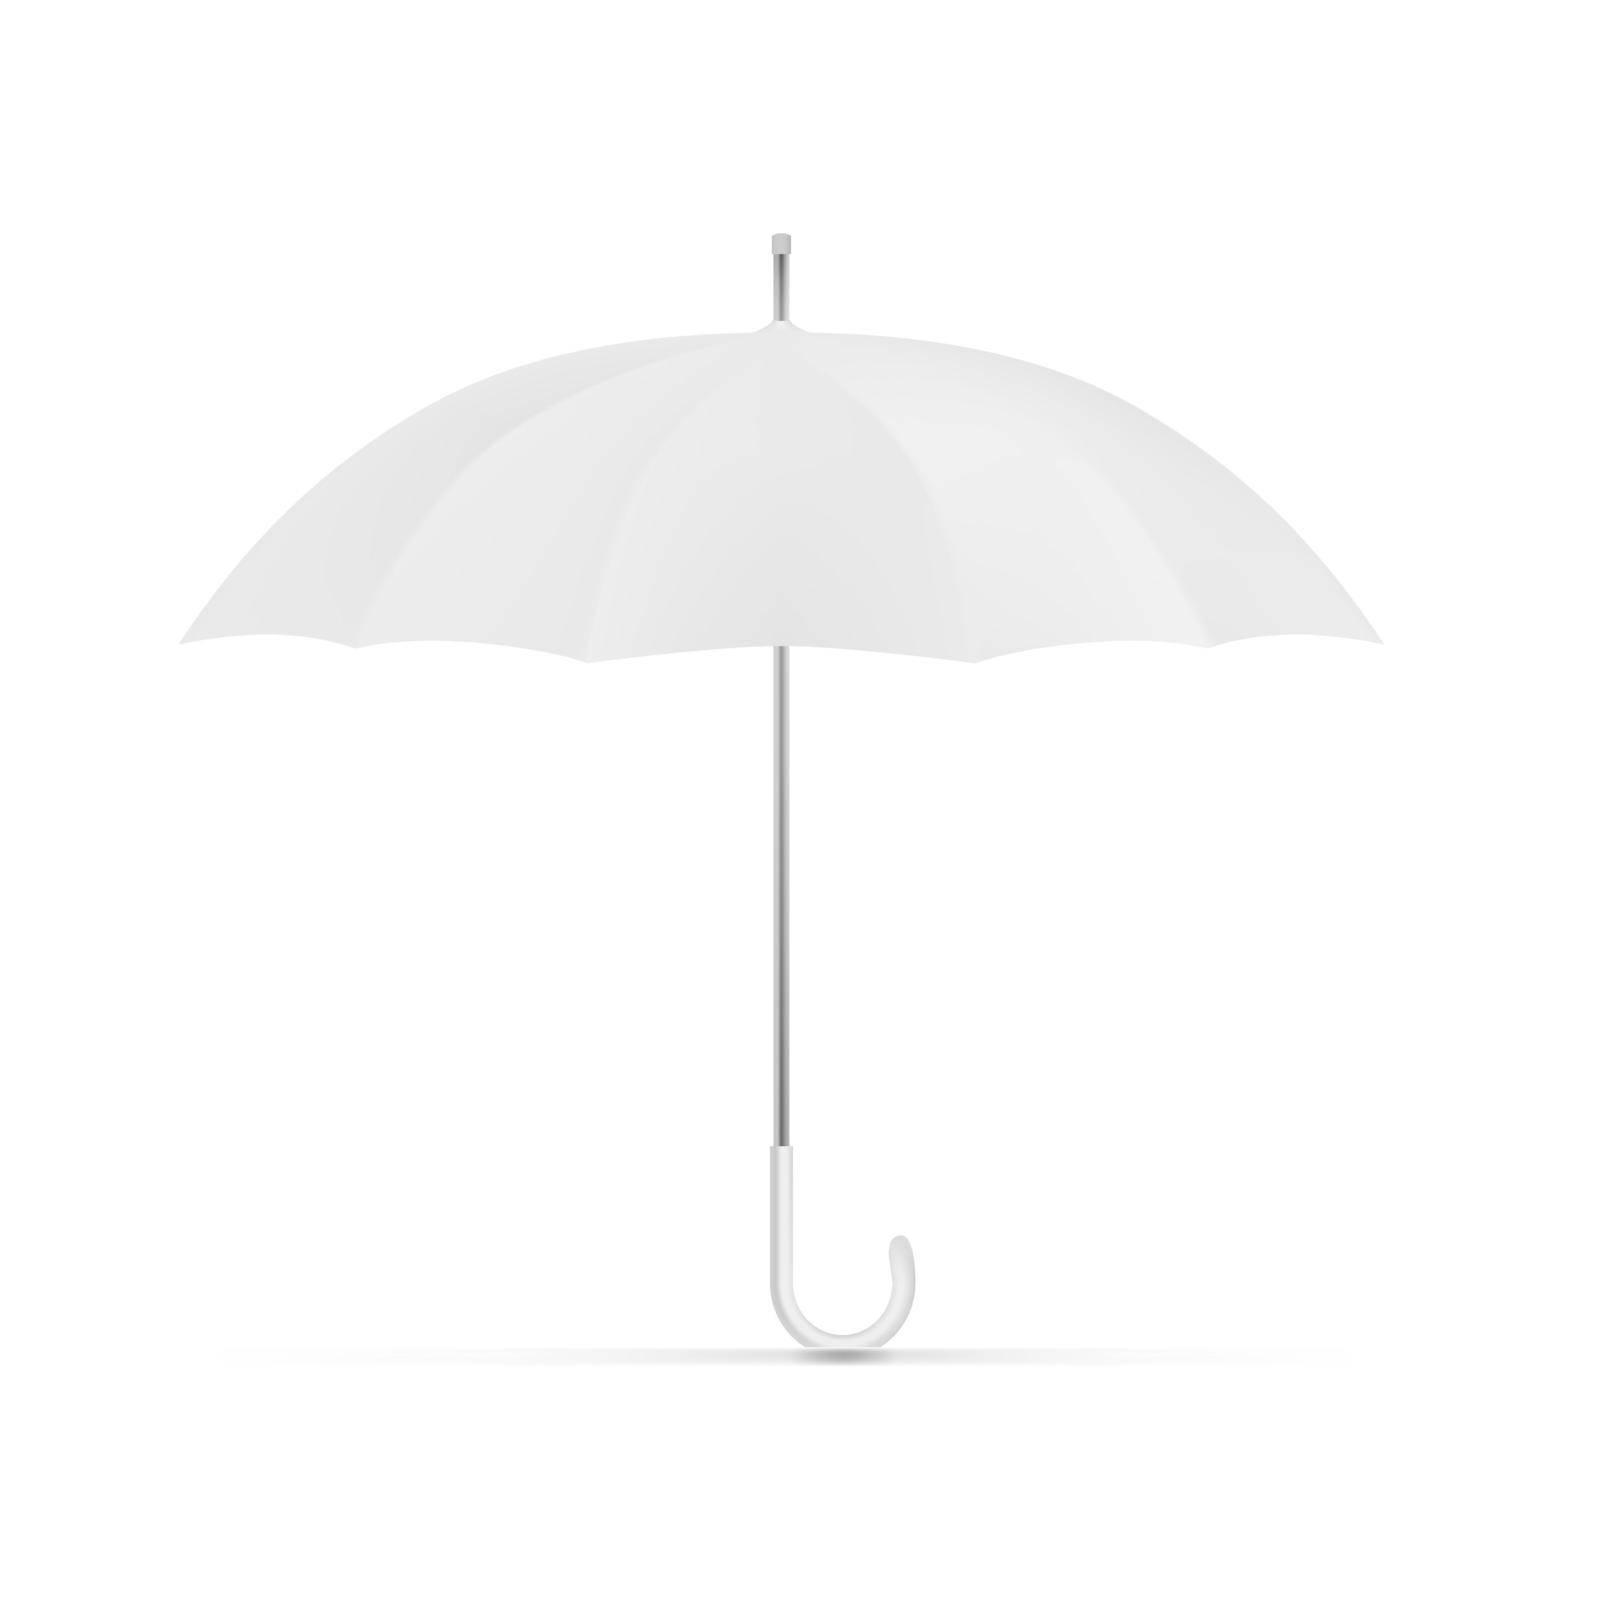 Realistic Blank White Umbrella From Side For Branding by VectorThings